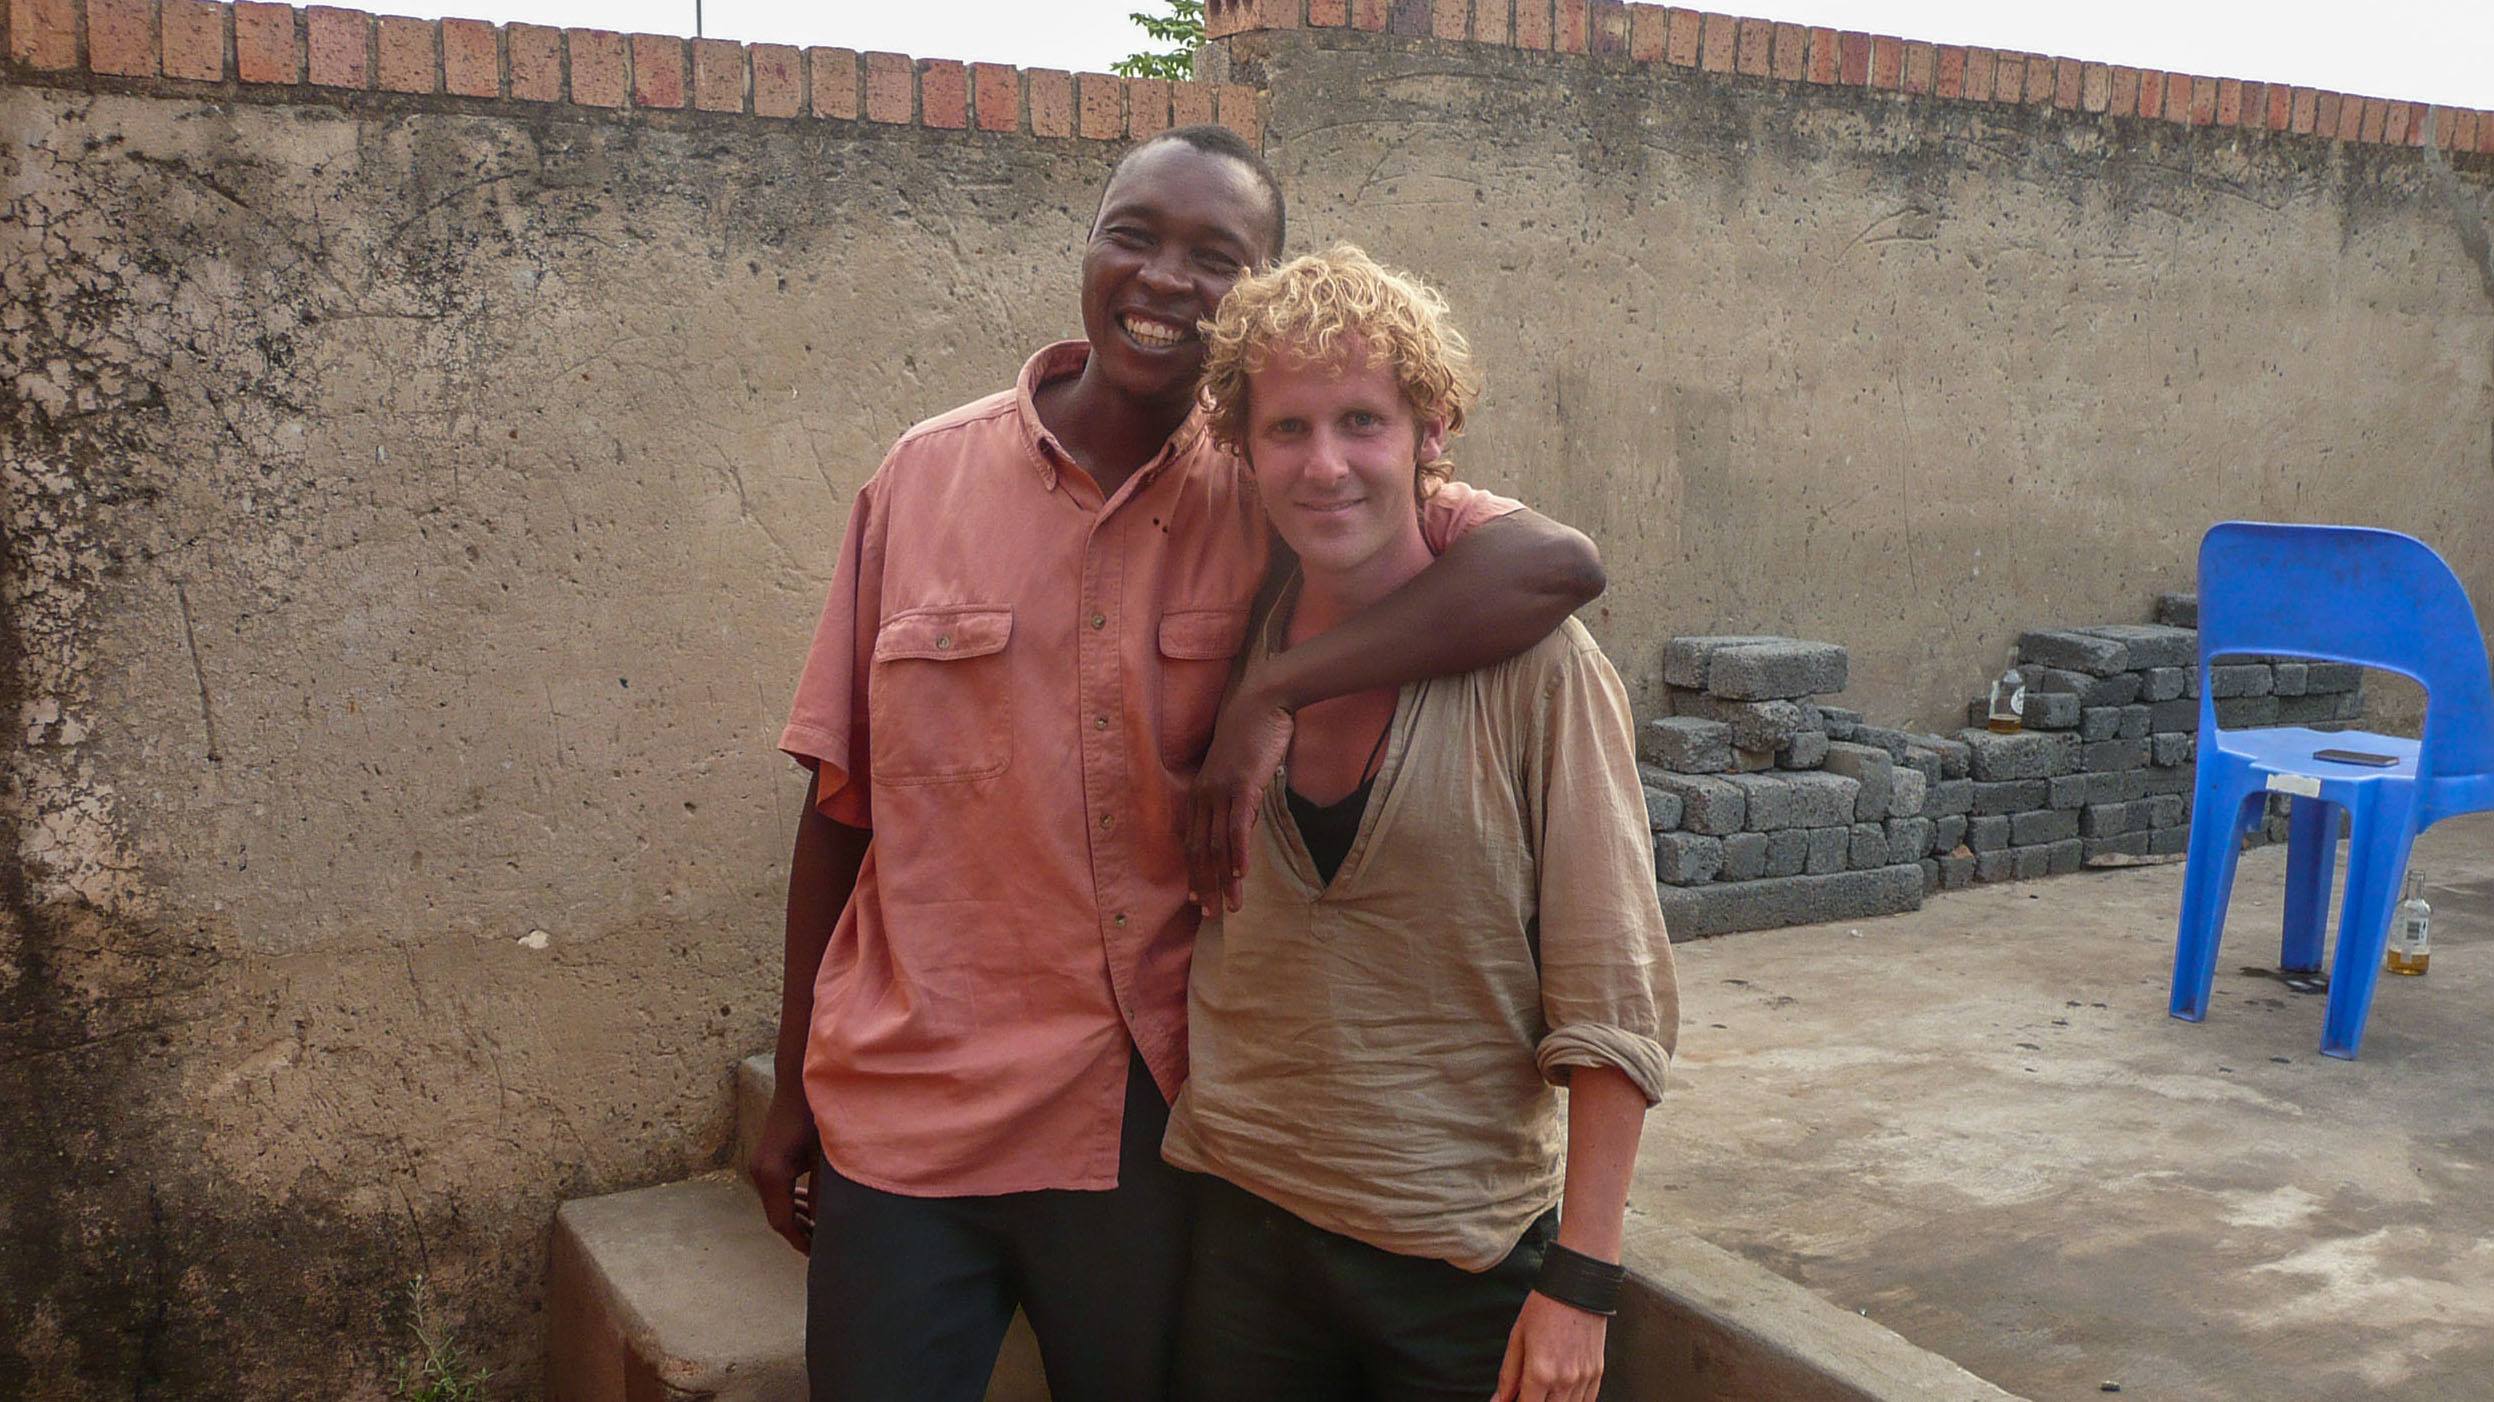 Ben with a new friend in Soweto South Africa - About Me